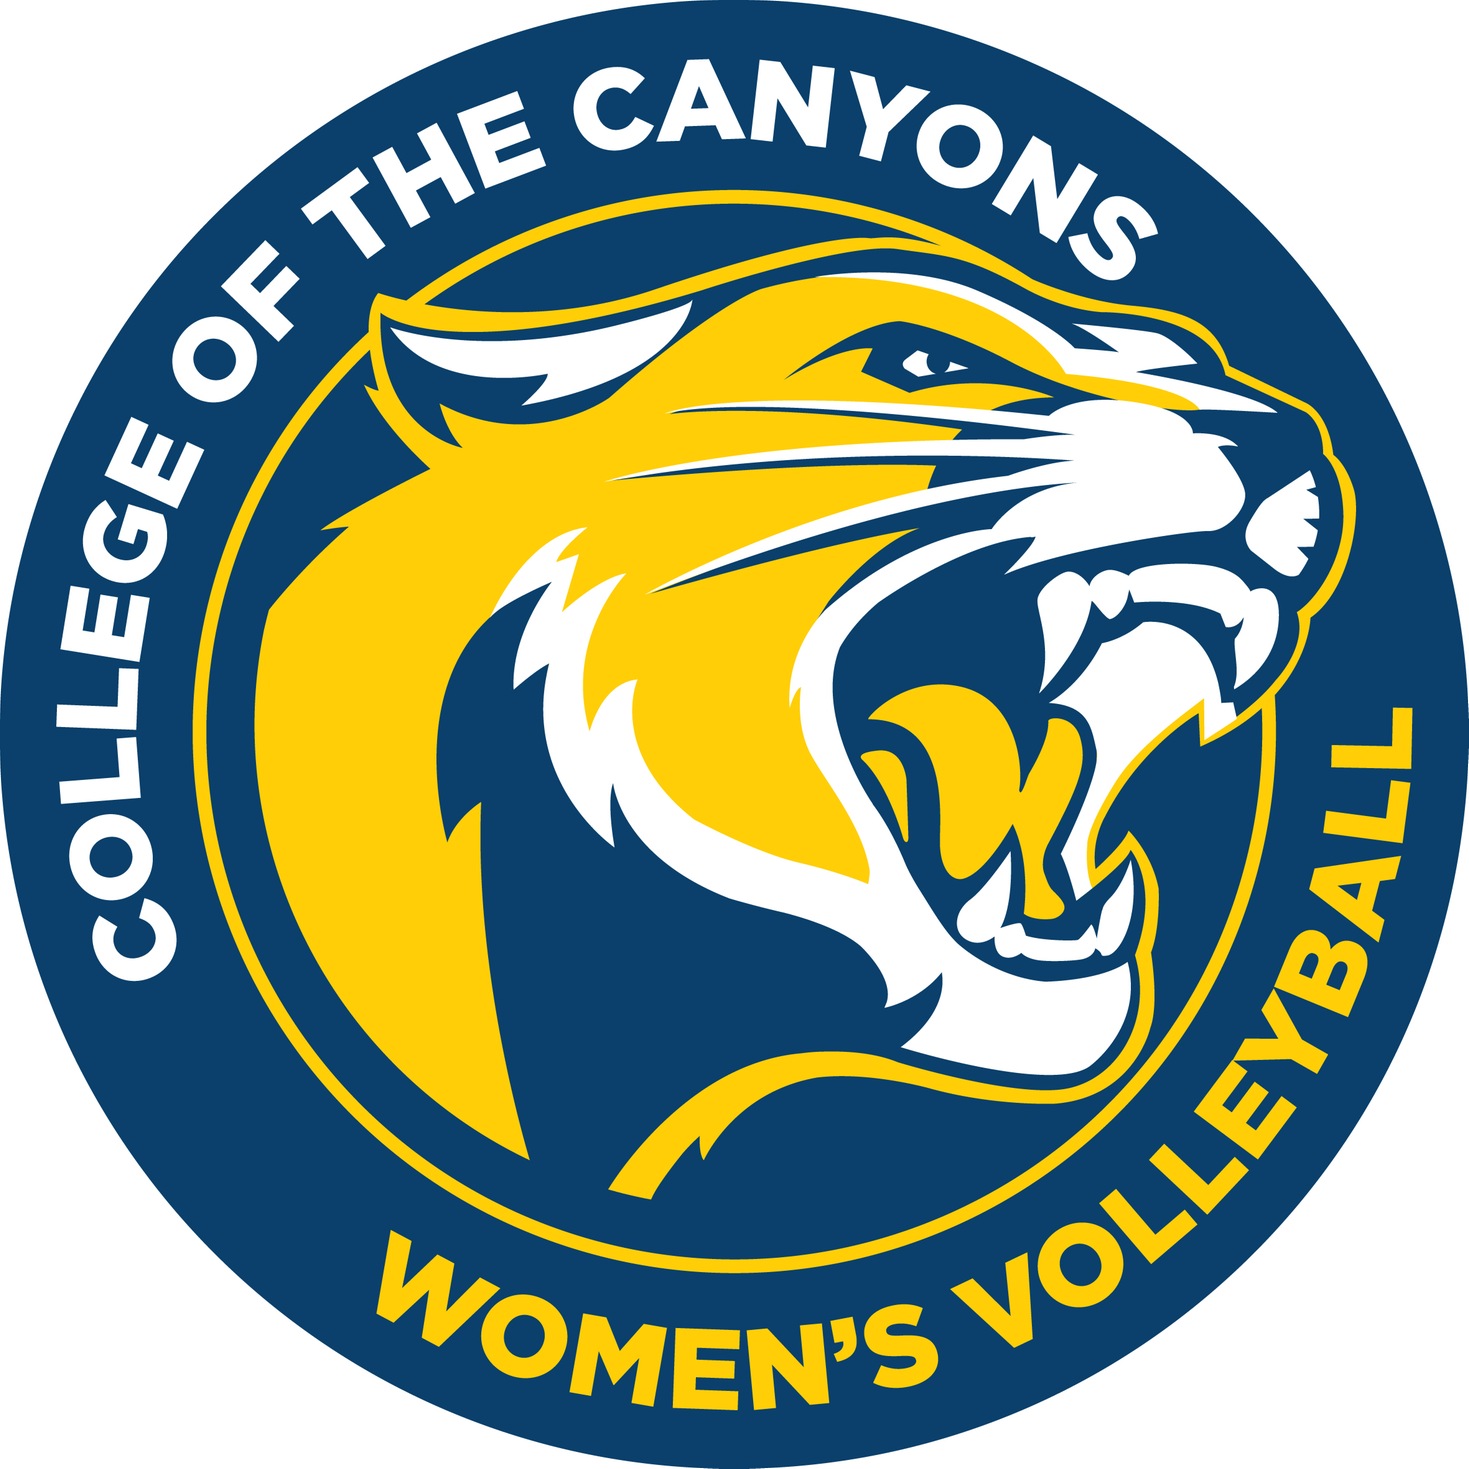 College of the Canyons women's volleyball logo.